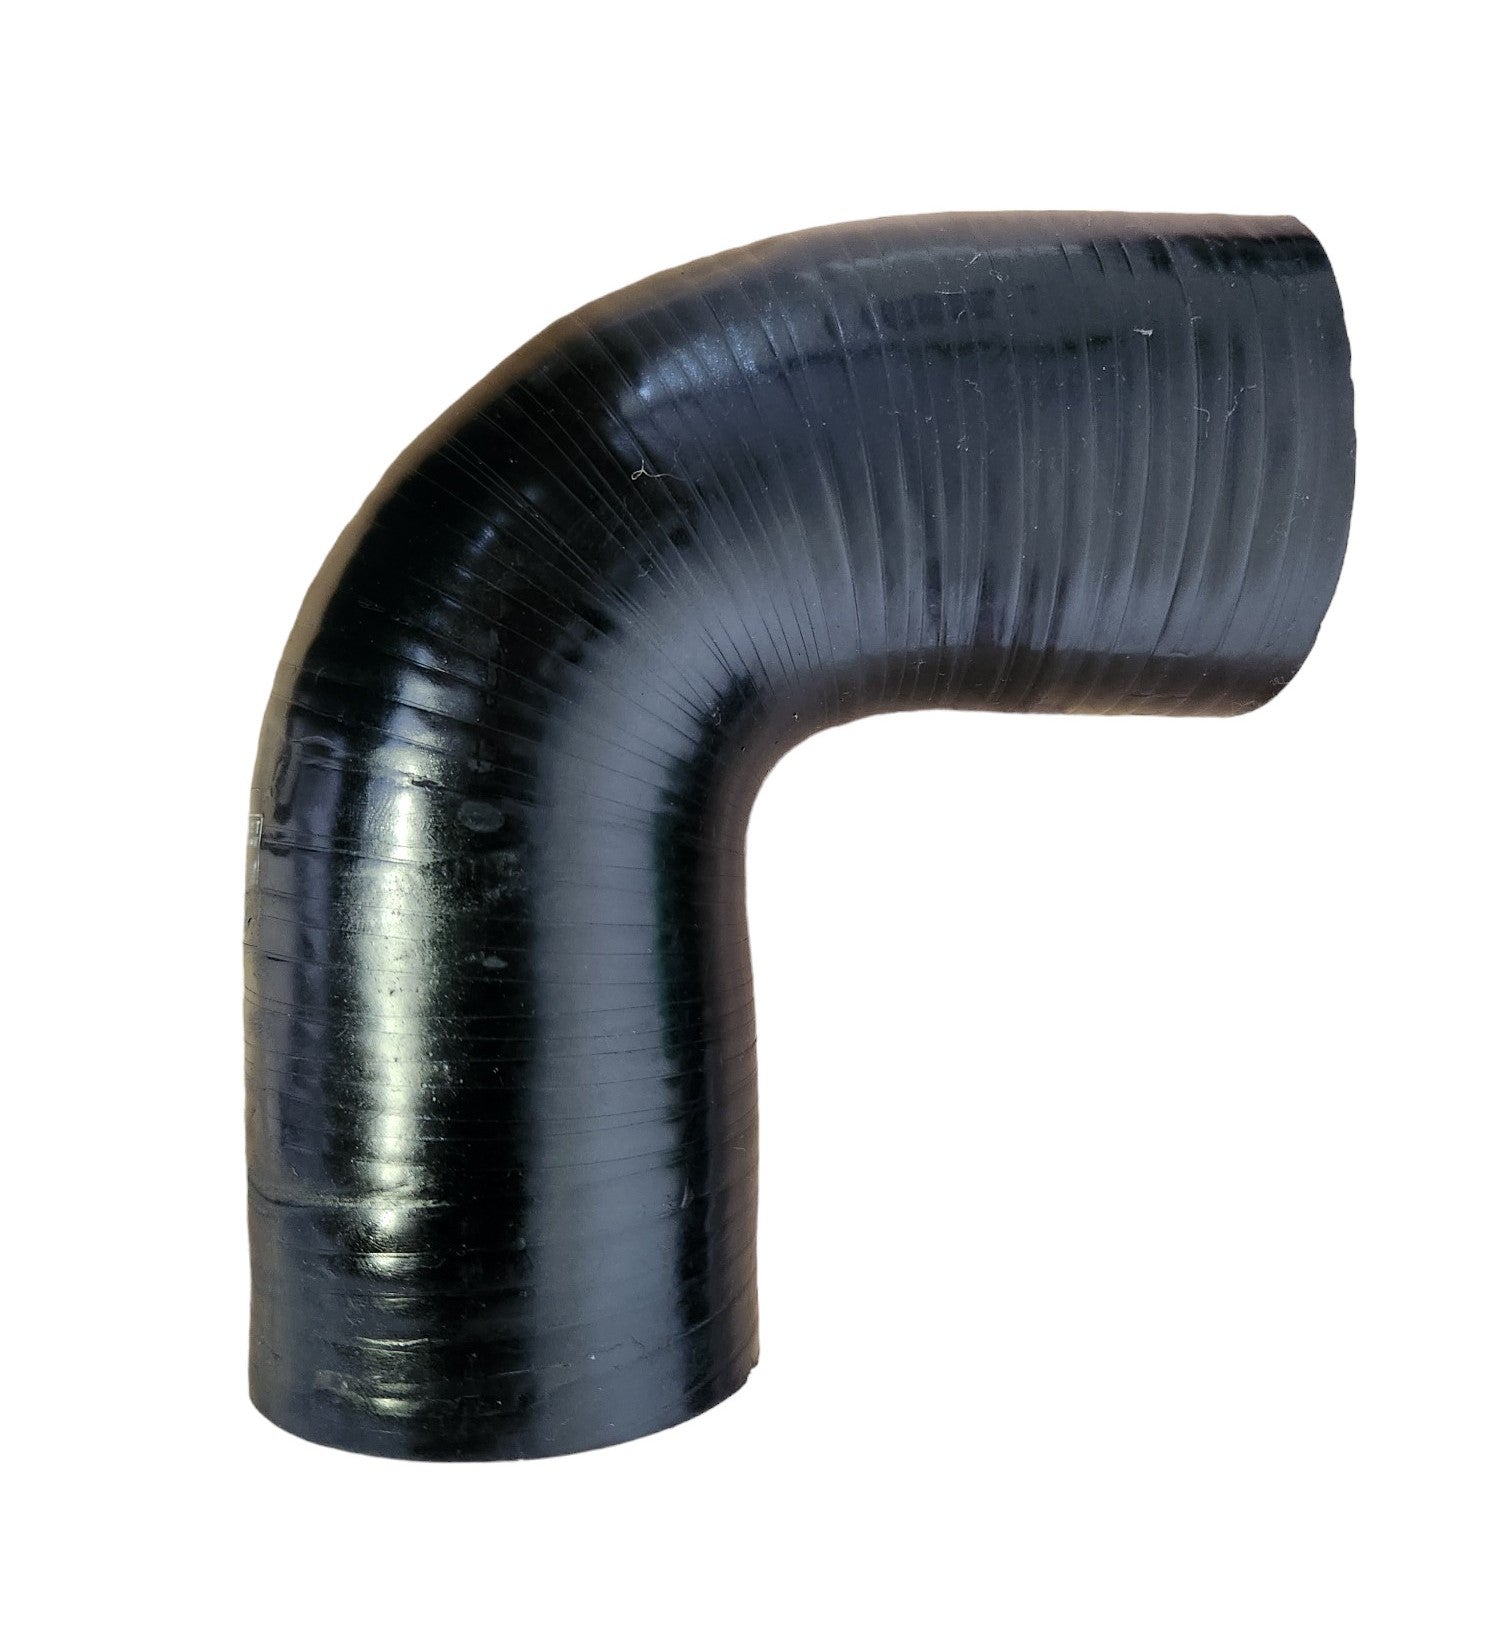 USED 63mm EUROJET BOOST PIPE ELBOW (Straight - no reduction)